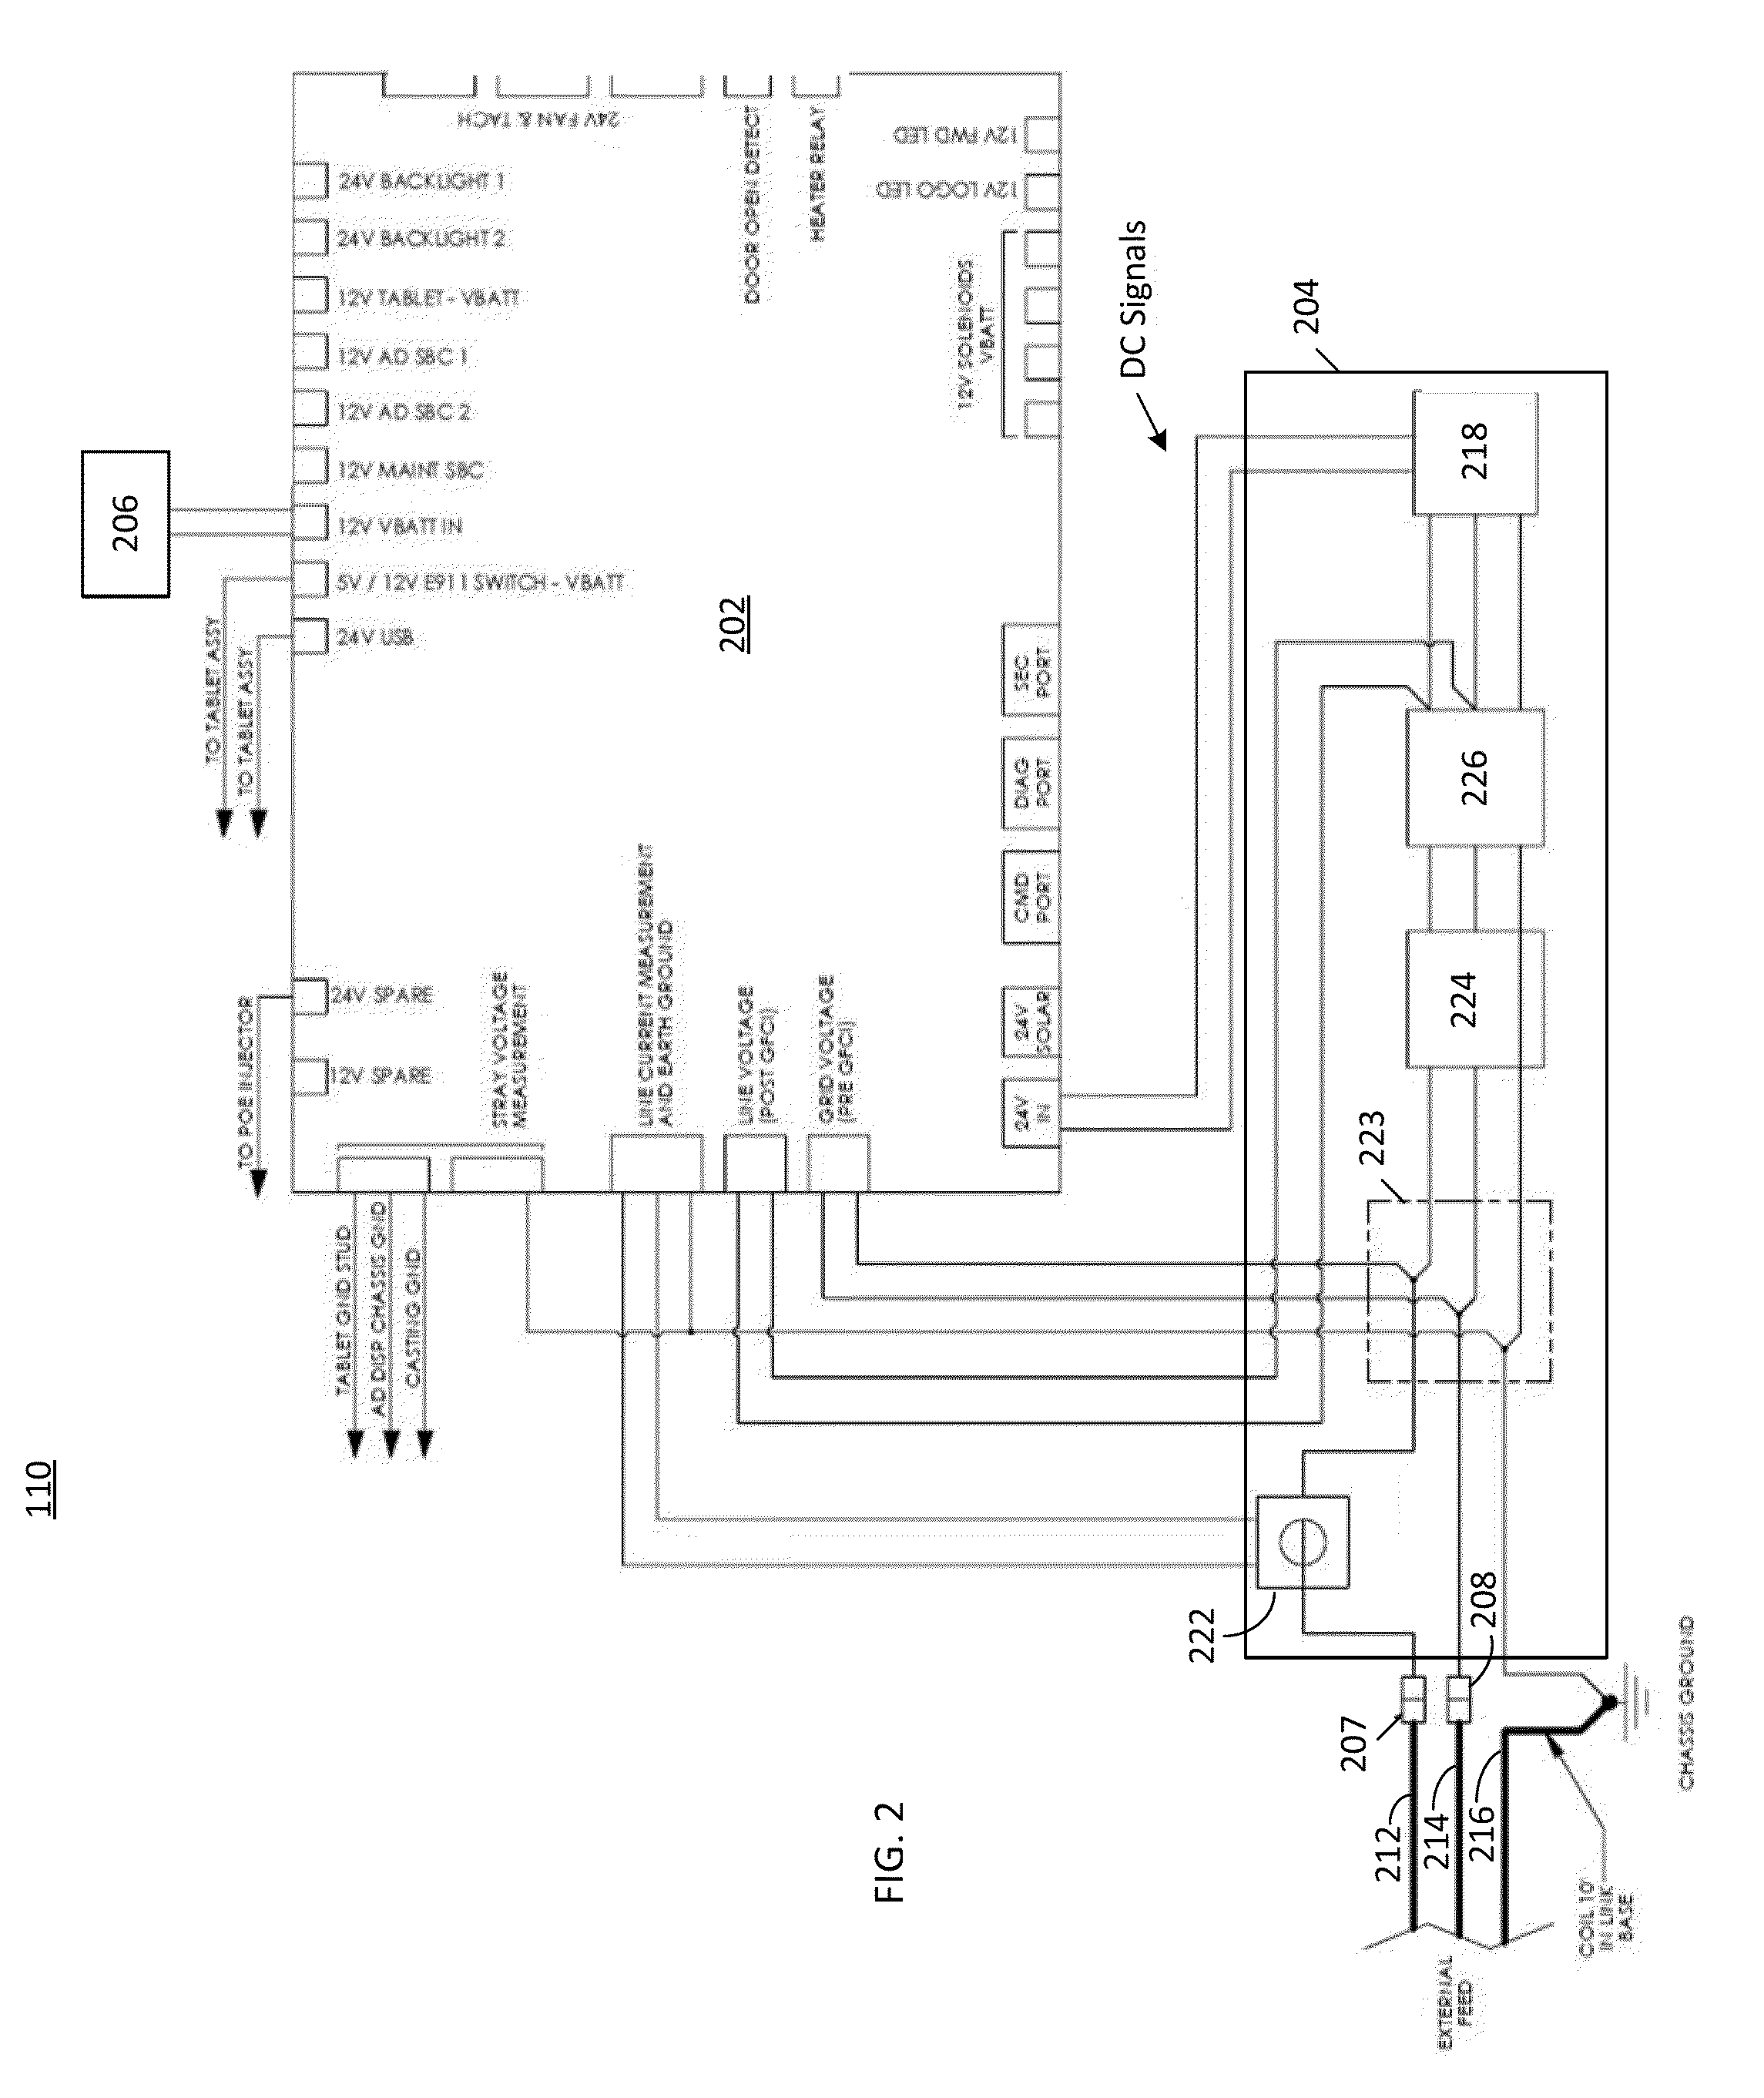 Techniques and apparatus for controlling access to components of a personal communication structure (PCS)